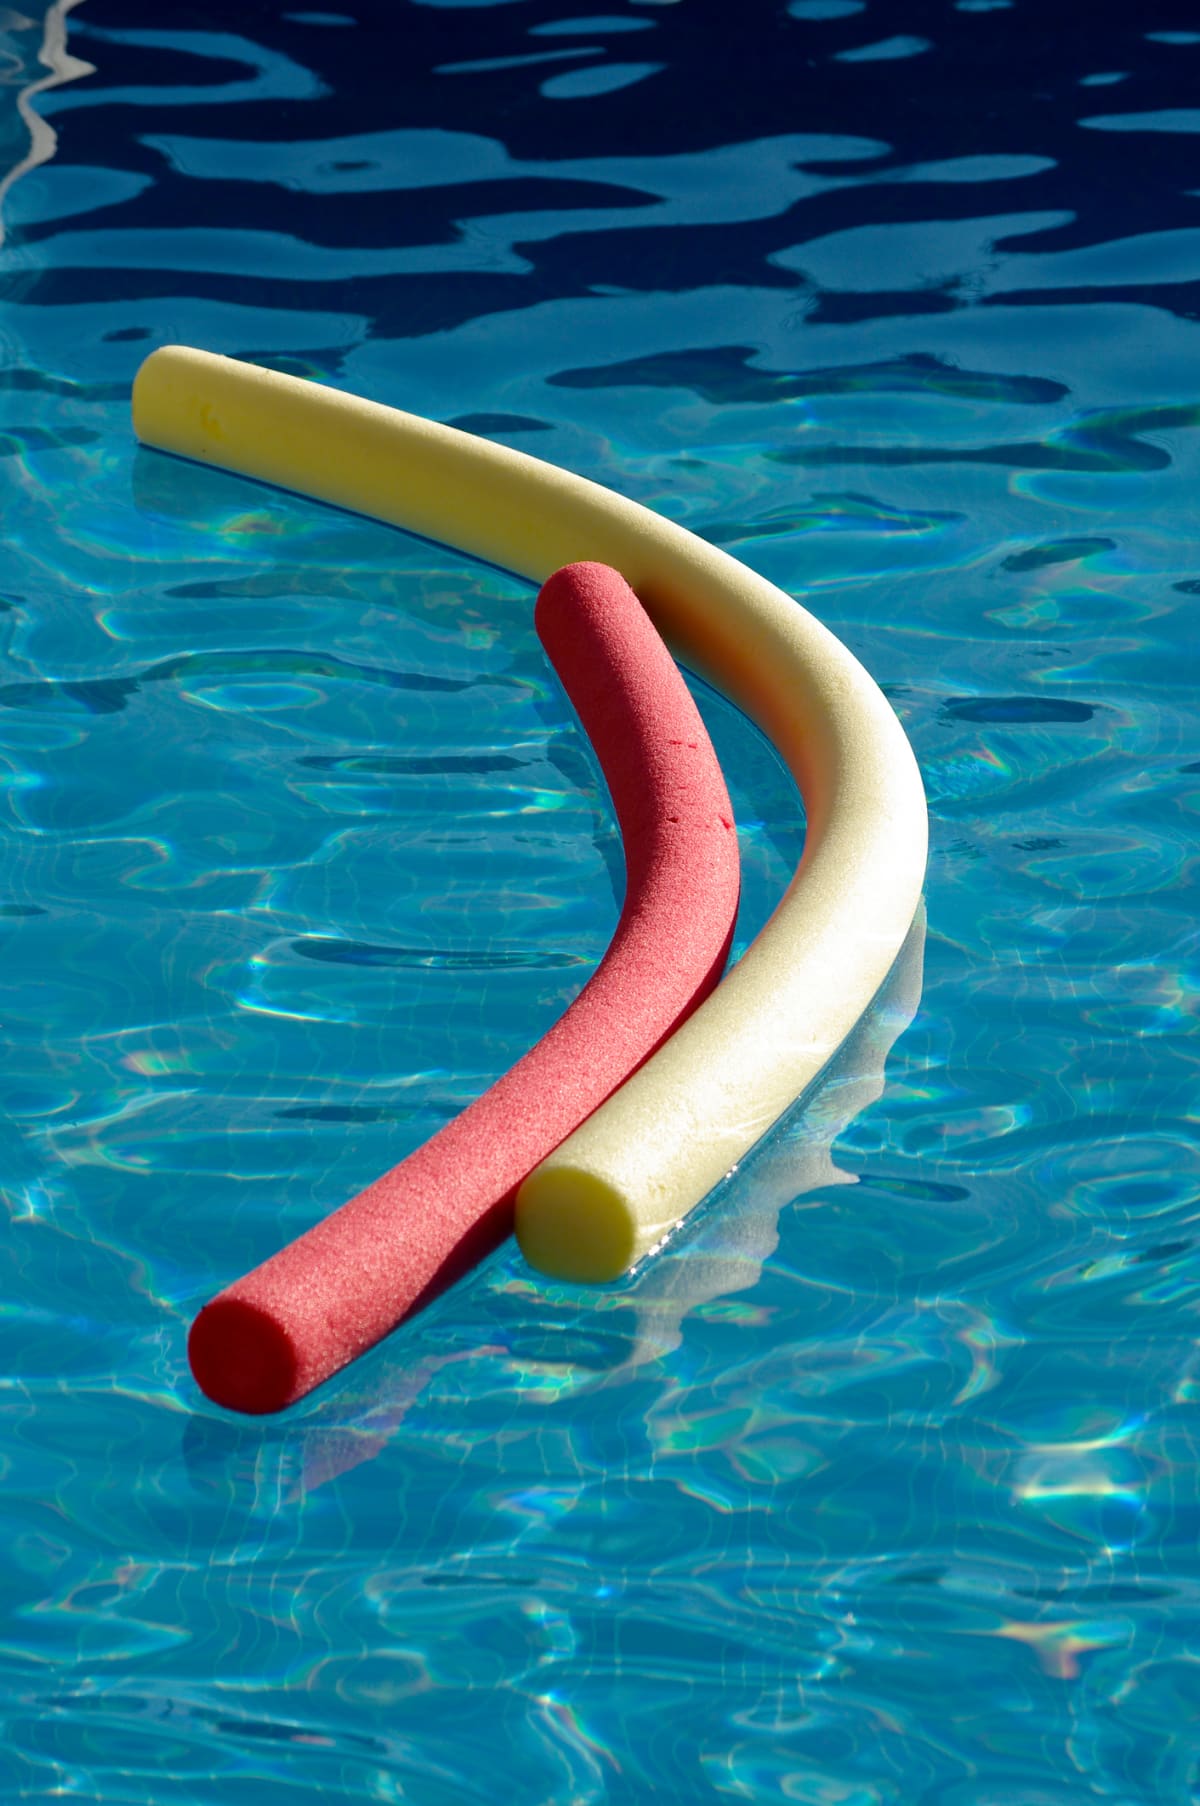 Yellow and red pool noodles on a swimming pool